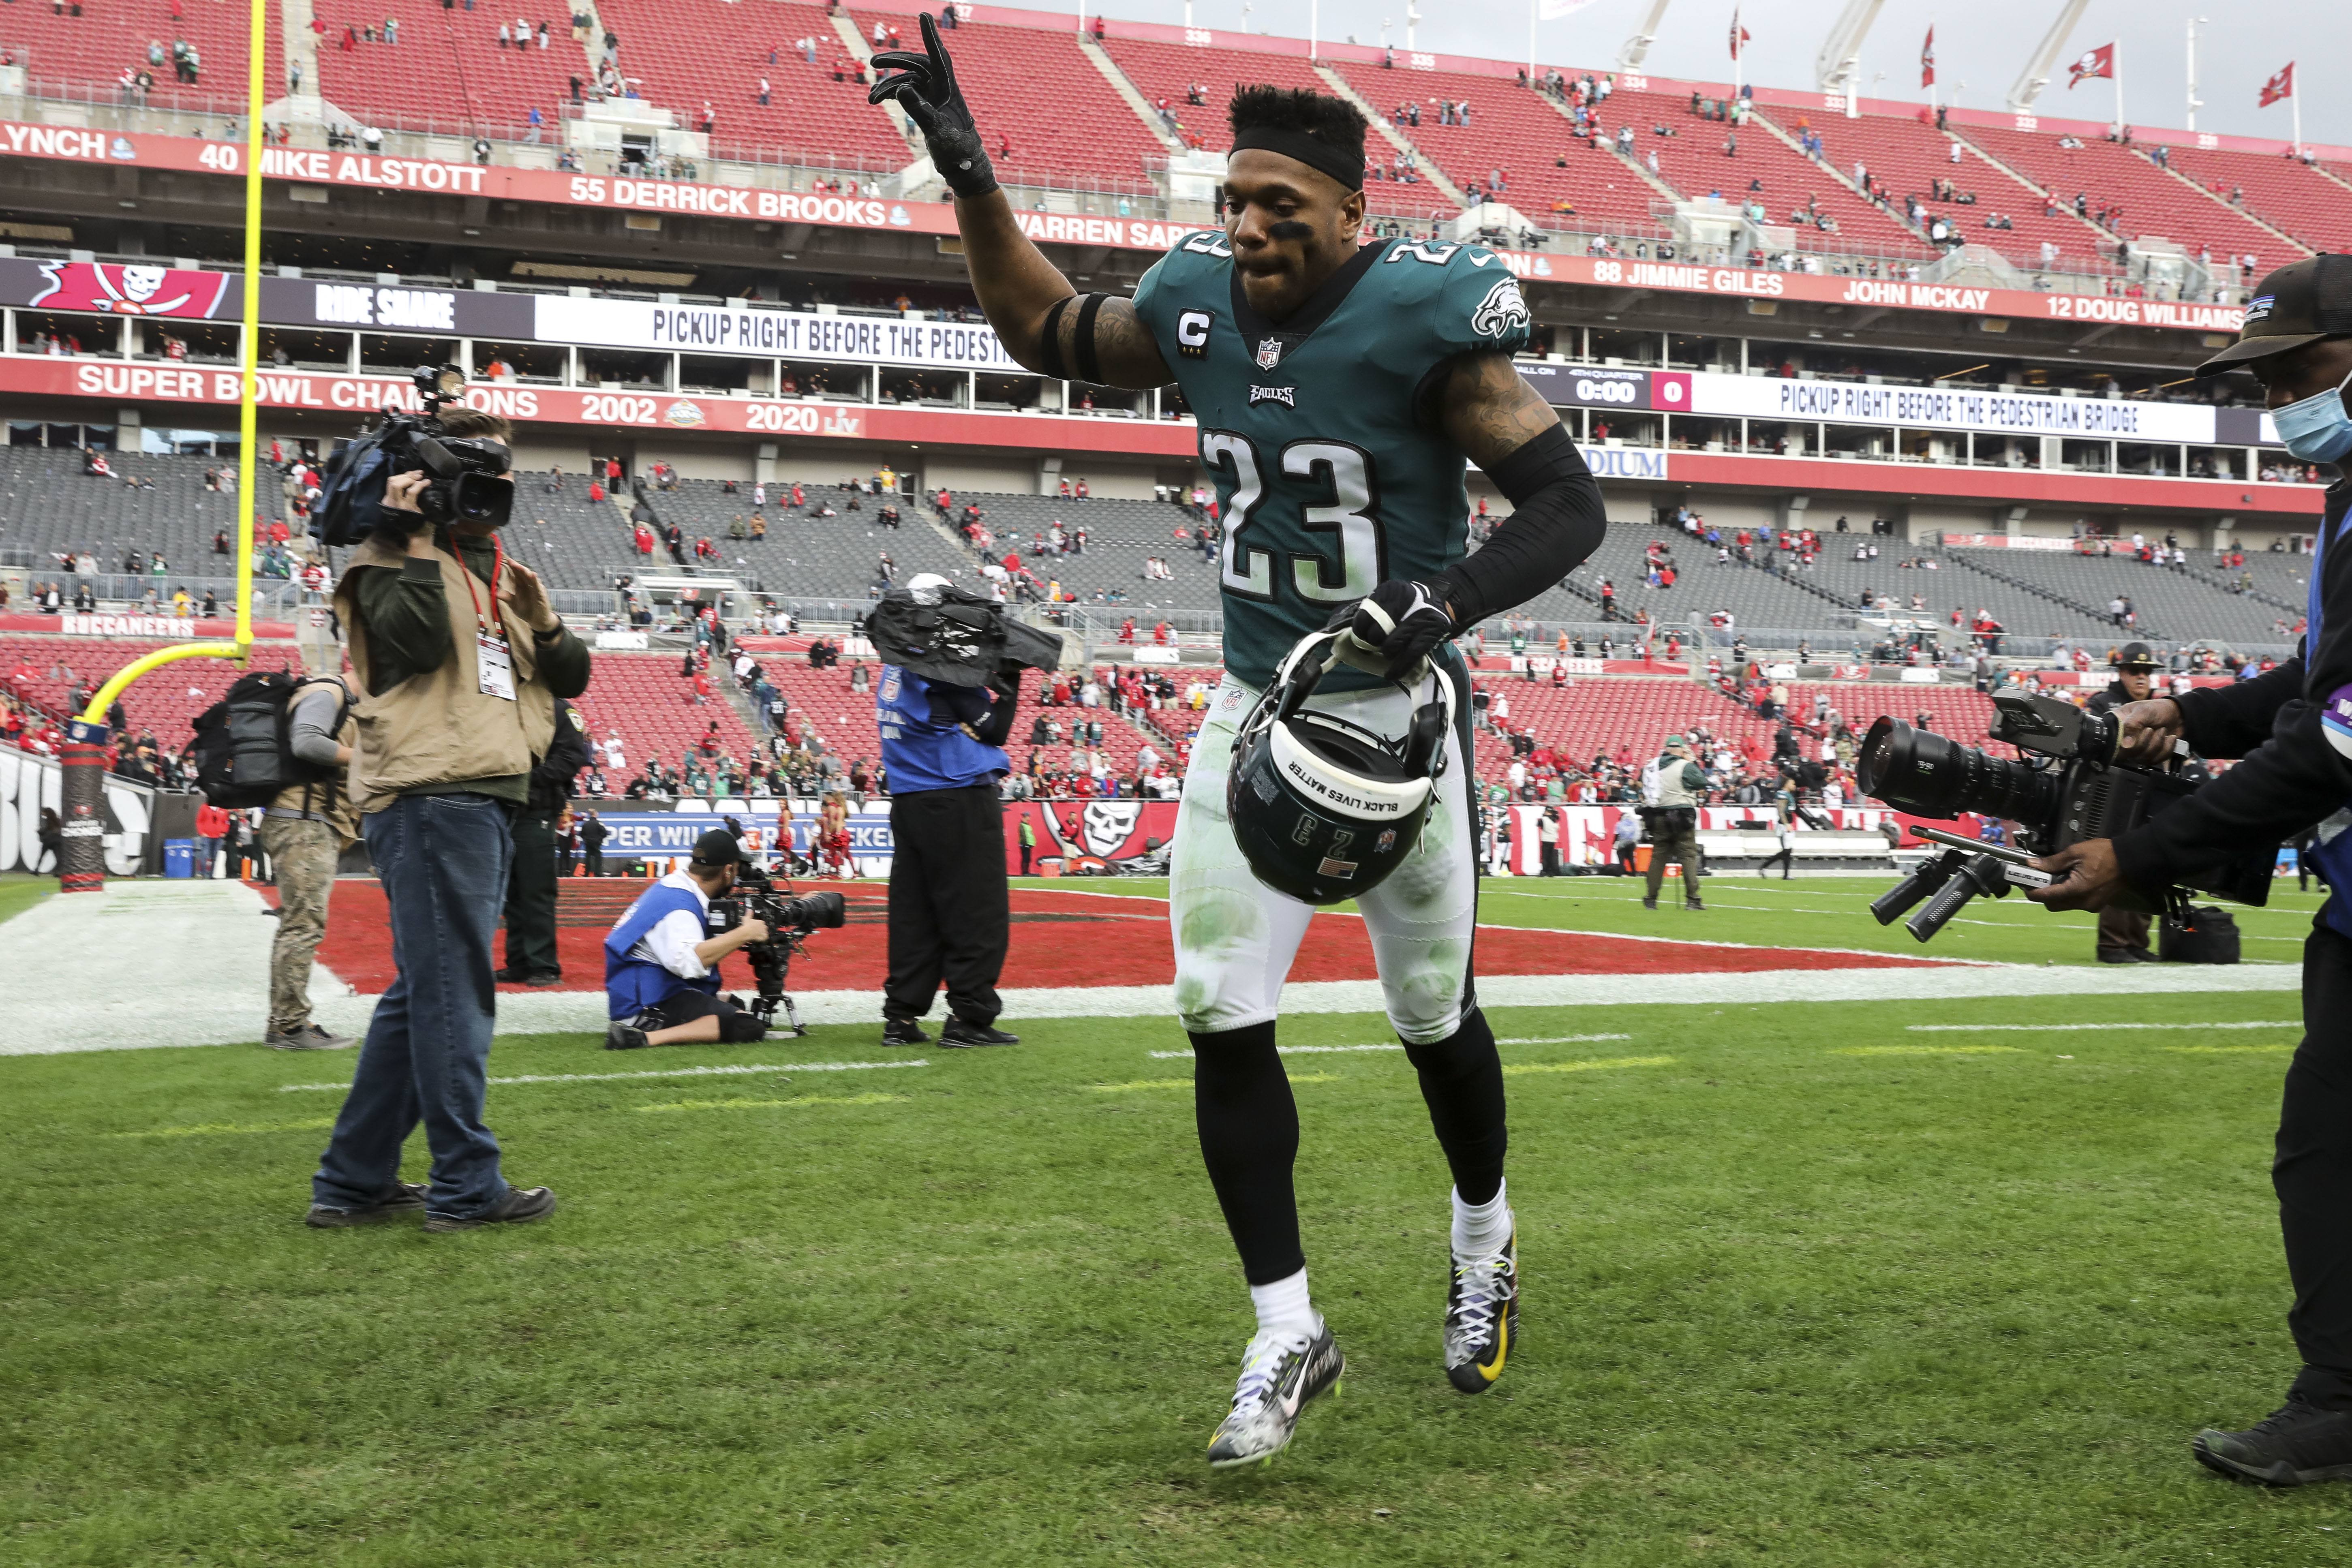 Colts: Finalizing deal with former Eagles S Rodney McLeod